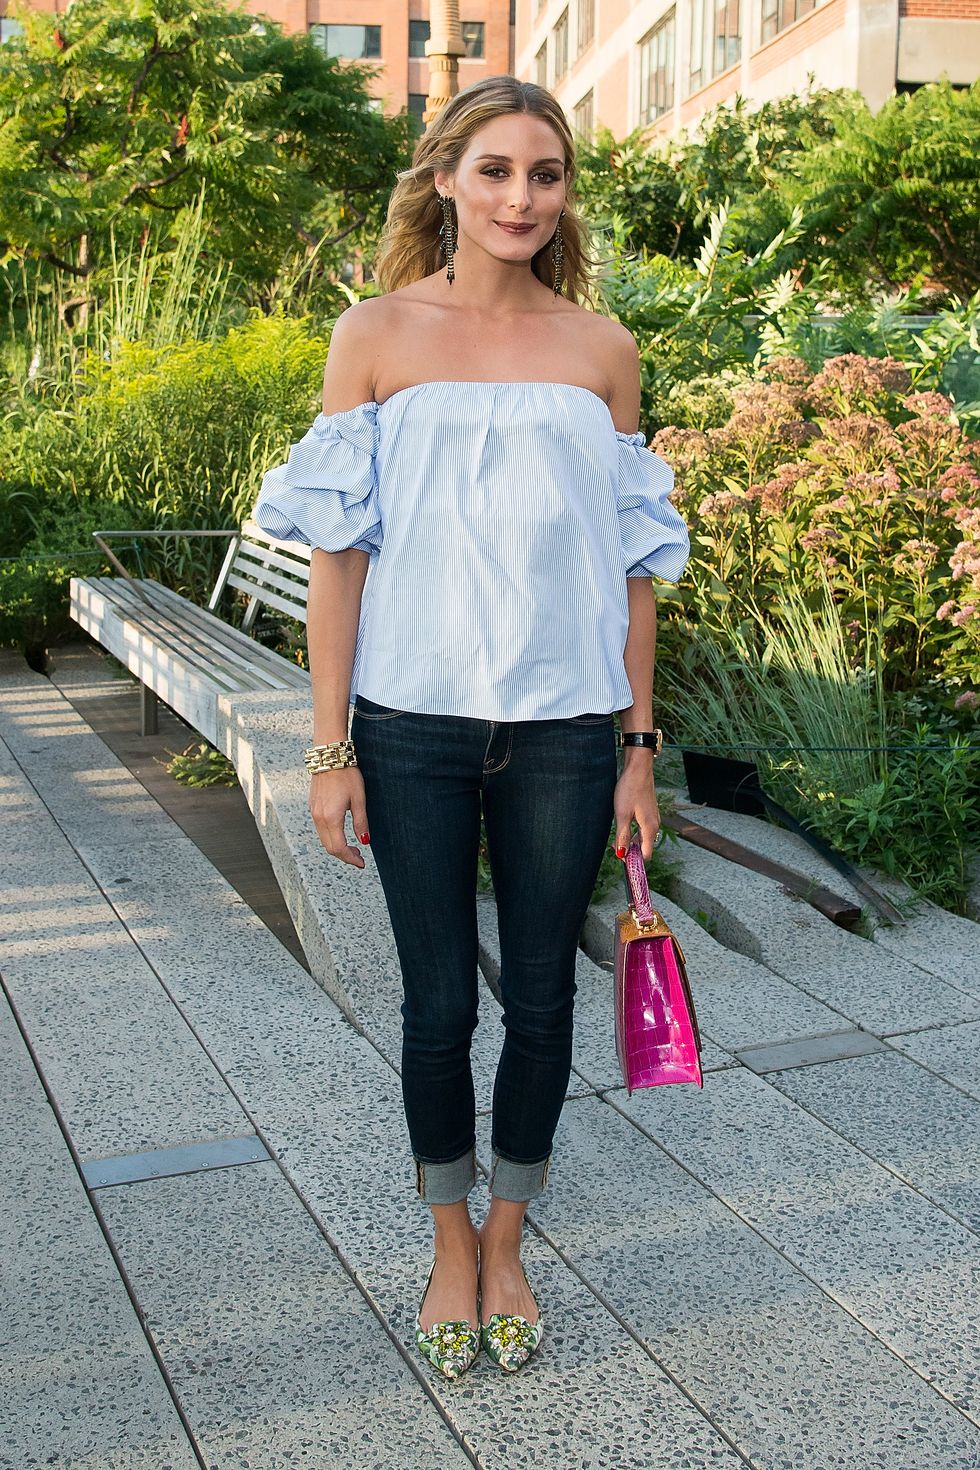 Olivia Palermo wearing cropped jeans and an off-the-shoulder top